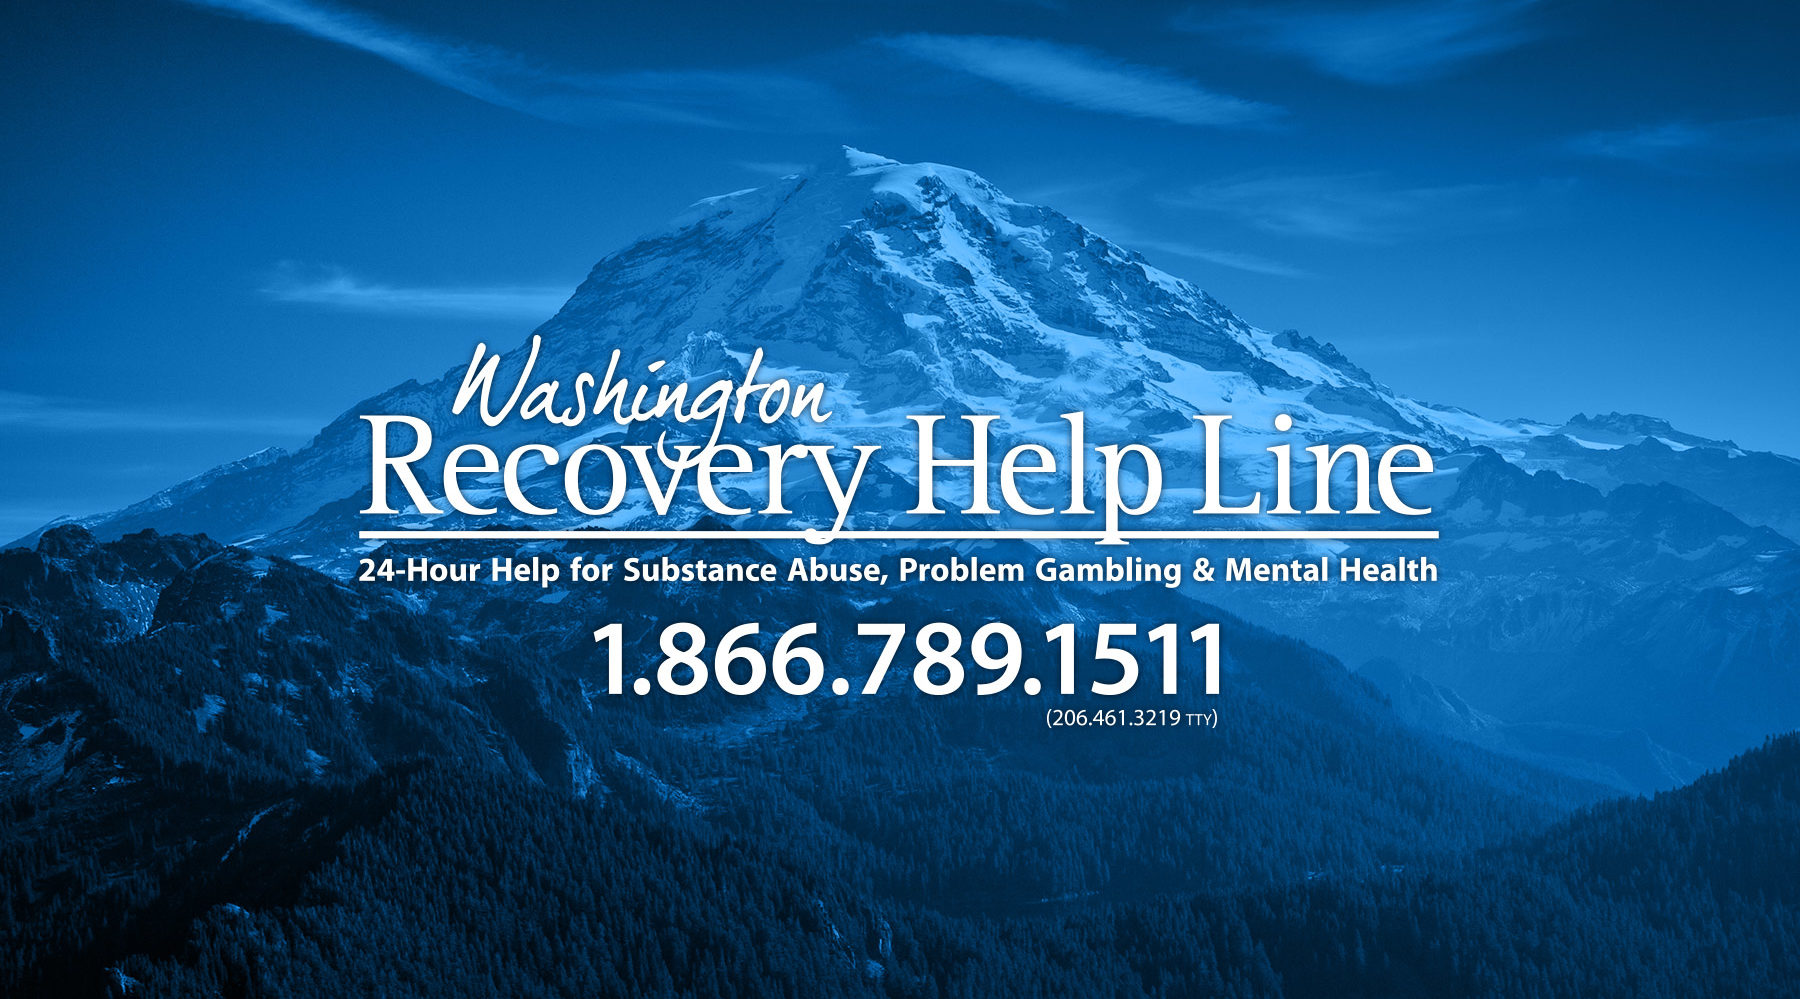 mount rainier with washington recovery help line logo and number 18667891511